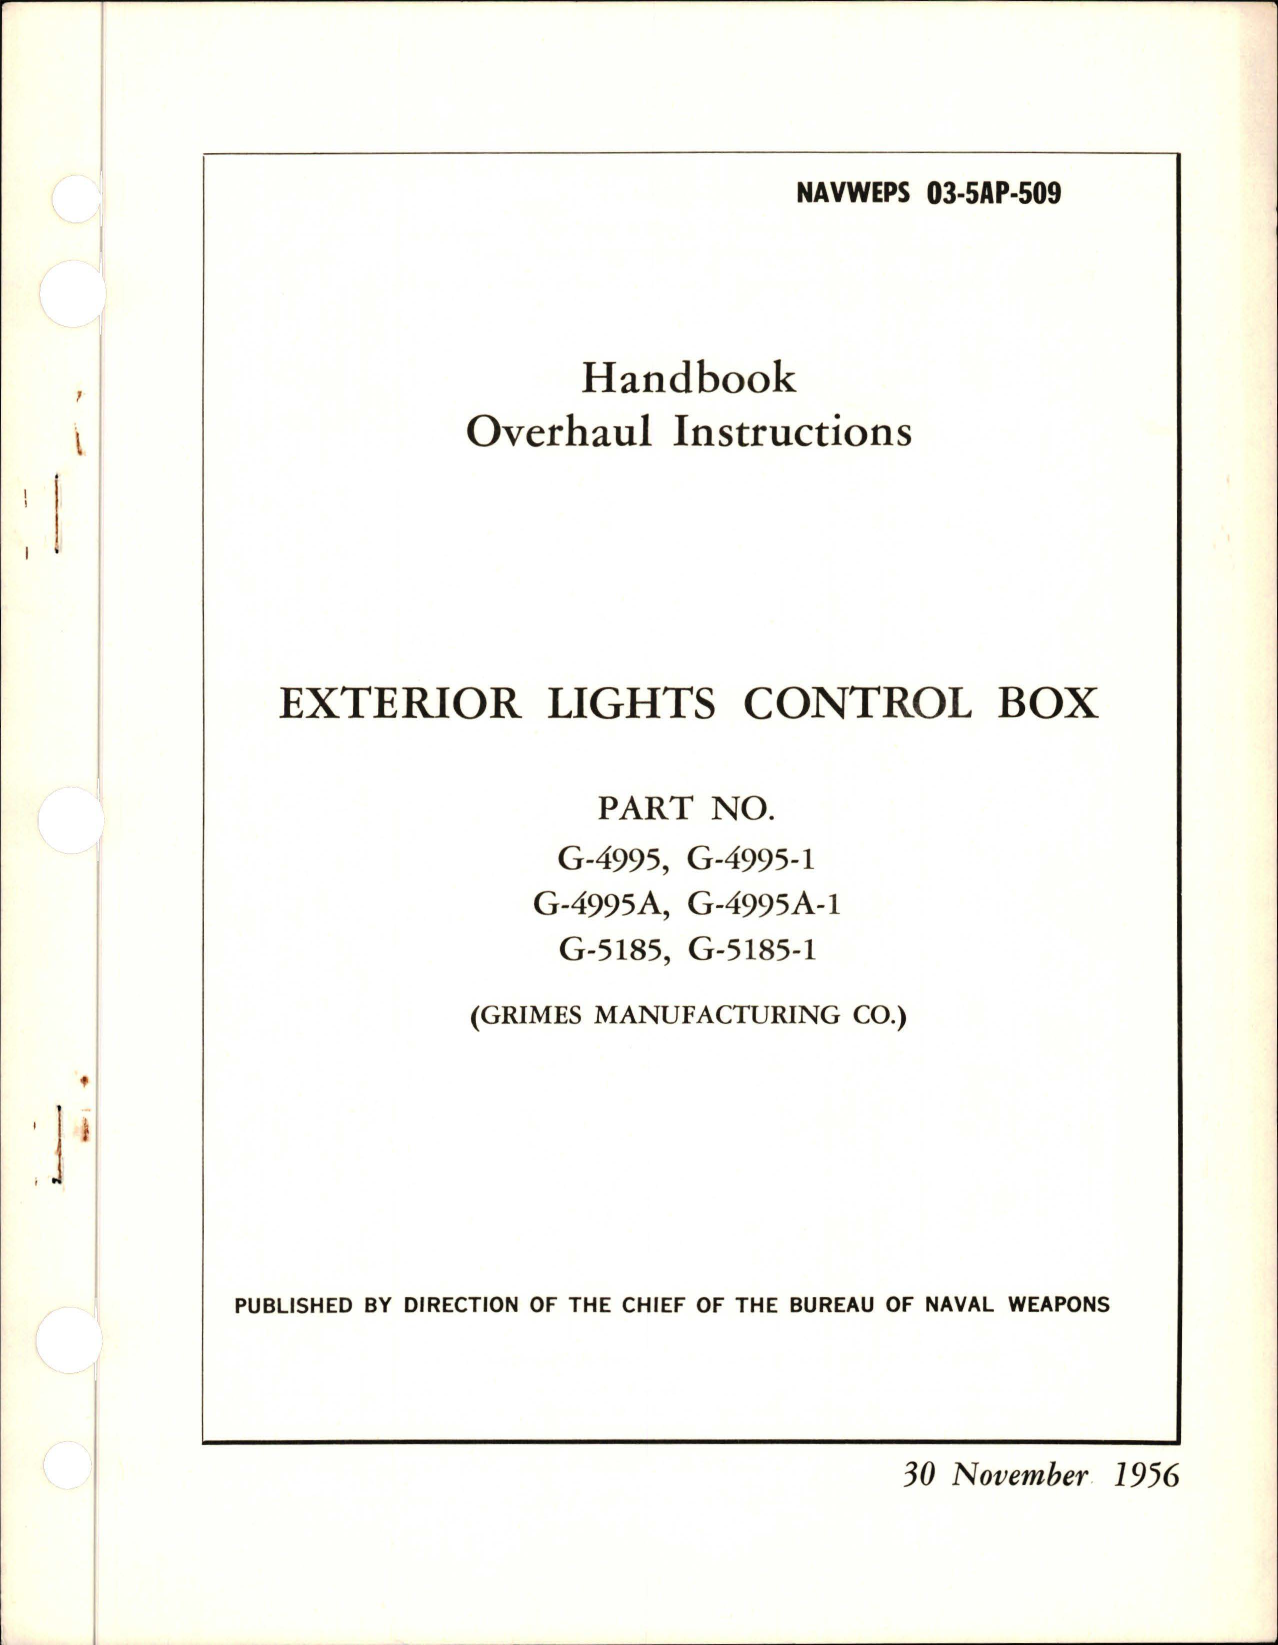 Sample page 1 from AirCorps Library document: Overhaul Instructions for Exterior Lights Control Box - Parts G-4995, G-4995-1, G-4995A, G-4995A-1, G-5185, and G-5185-1